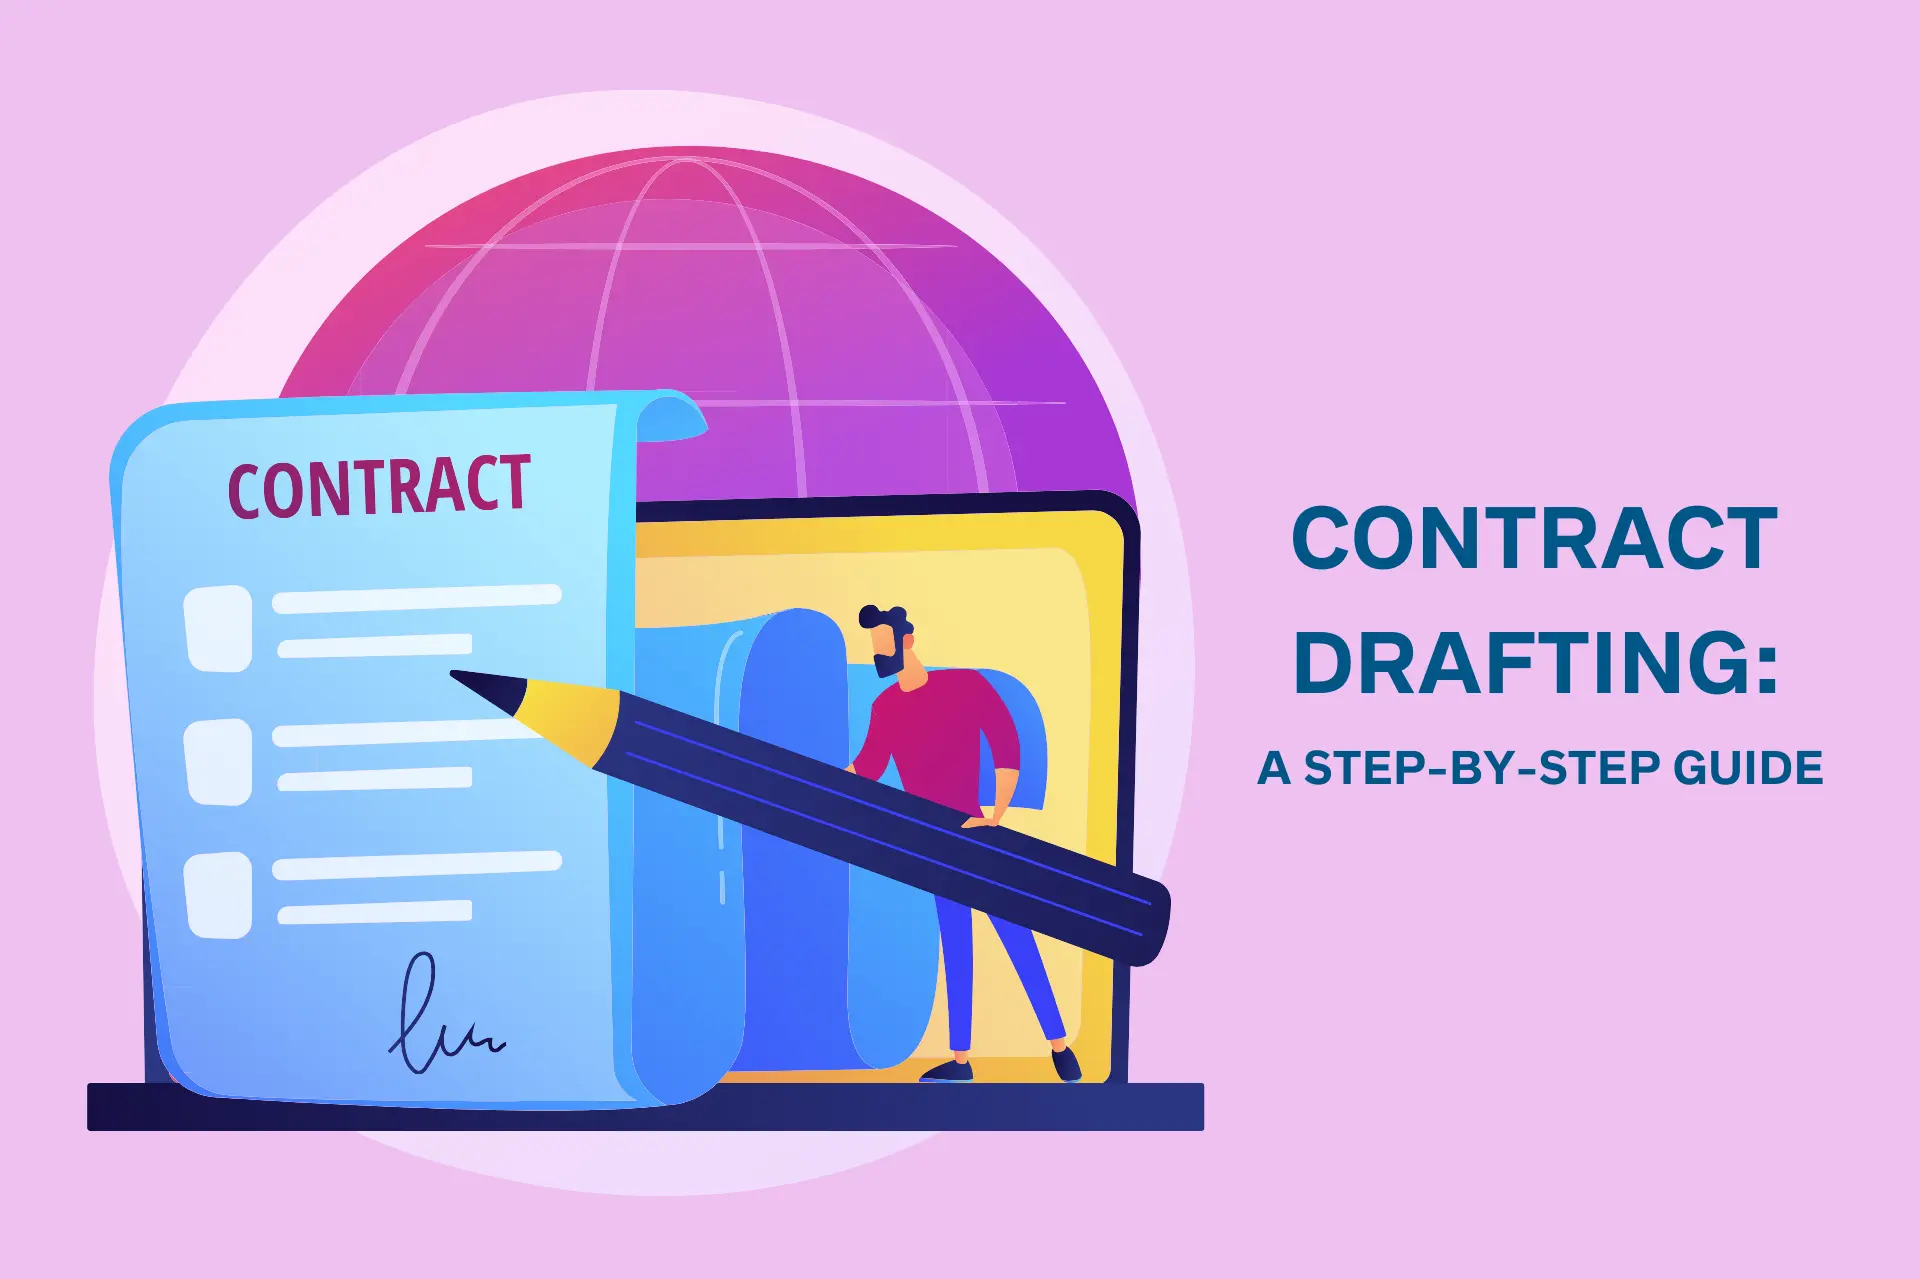 A Step-by-Step Guide To Drafting Contracts